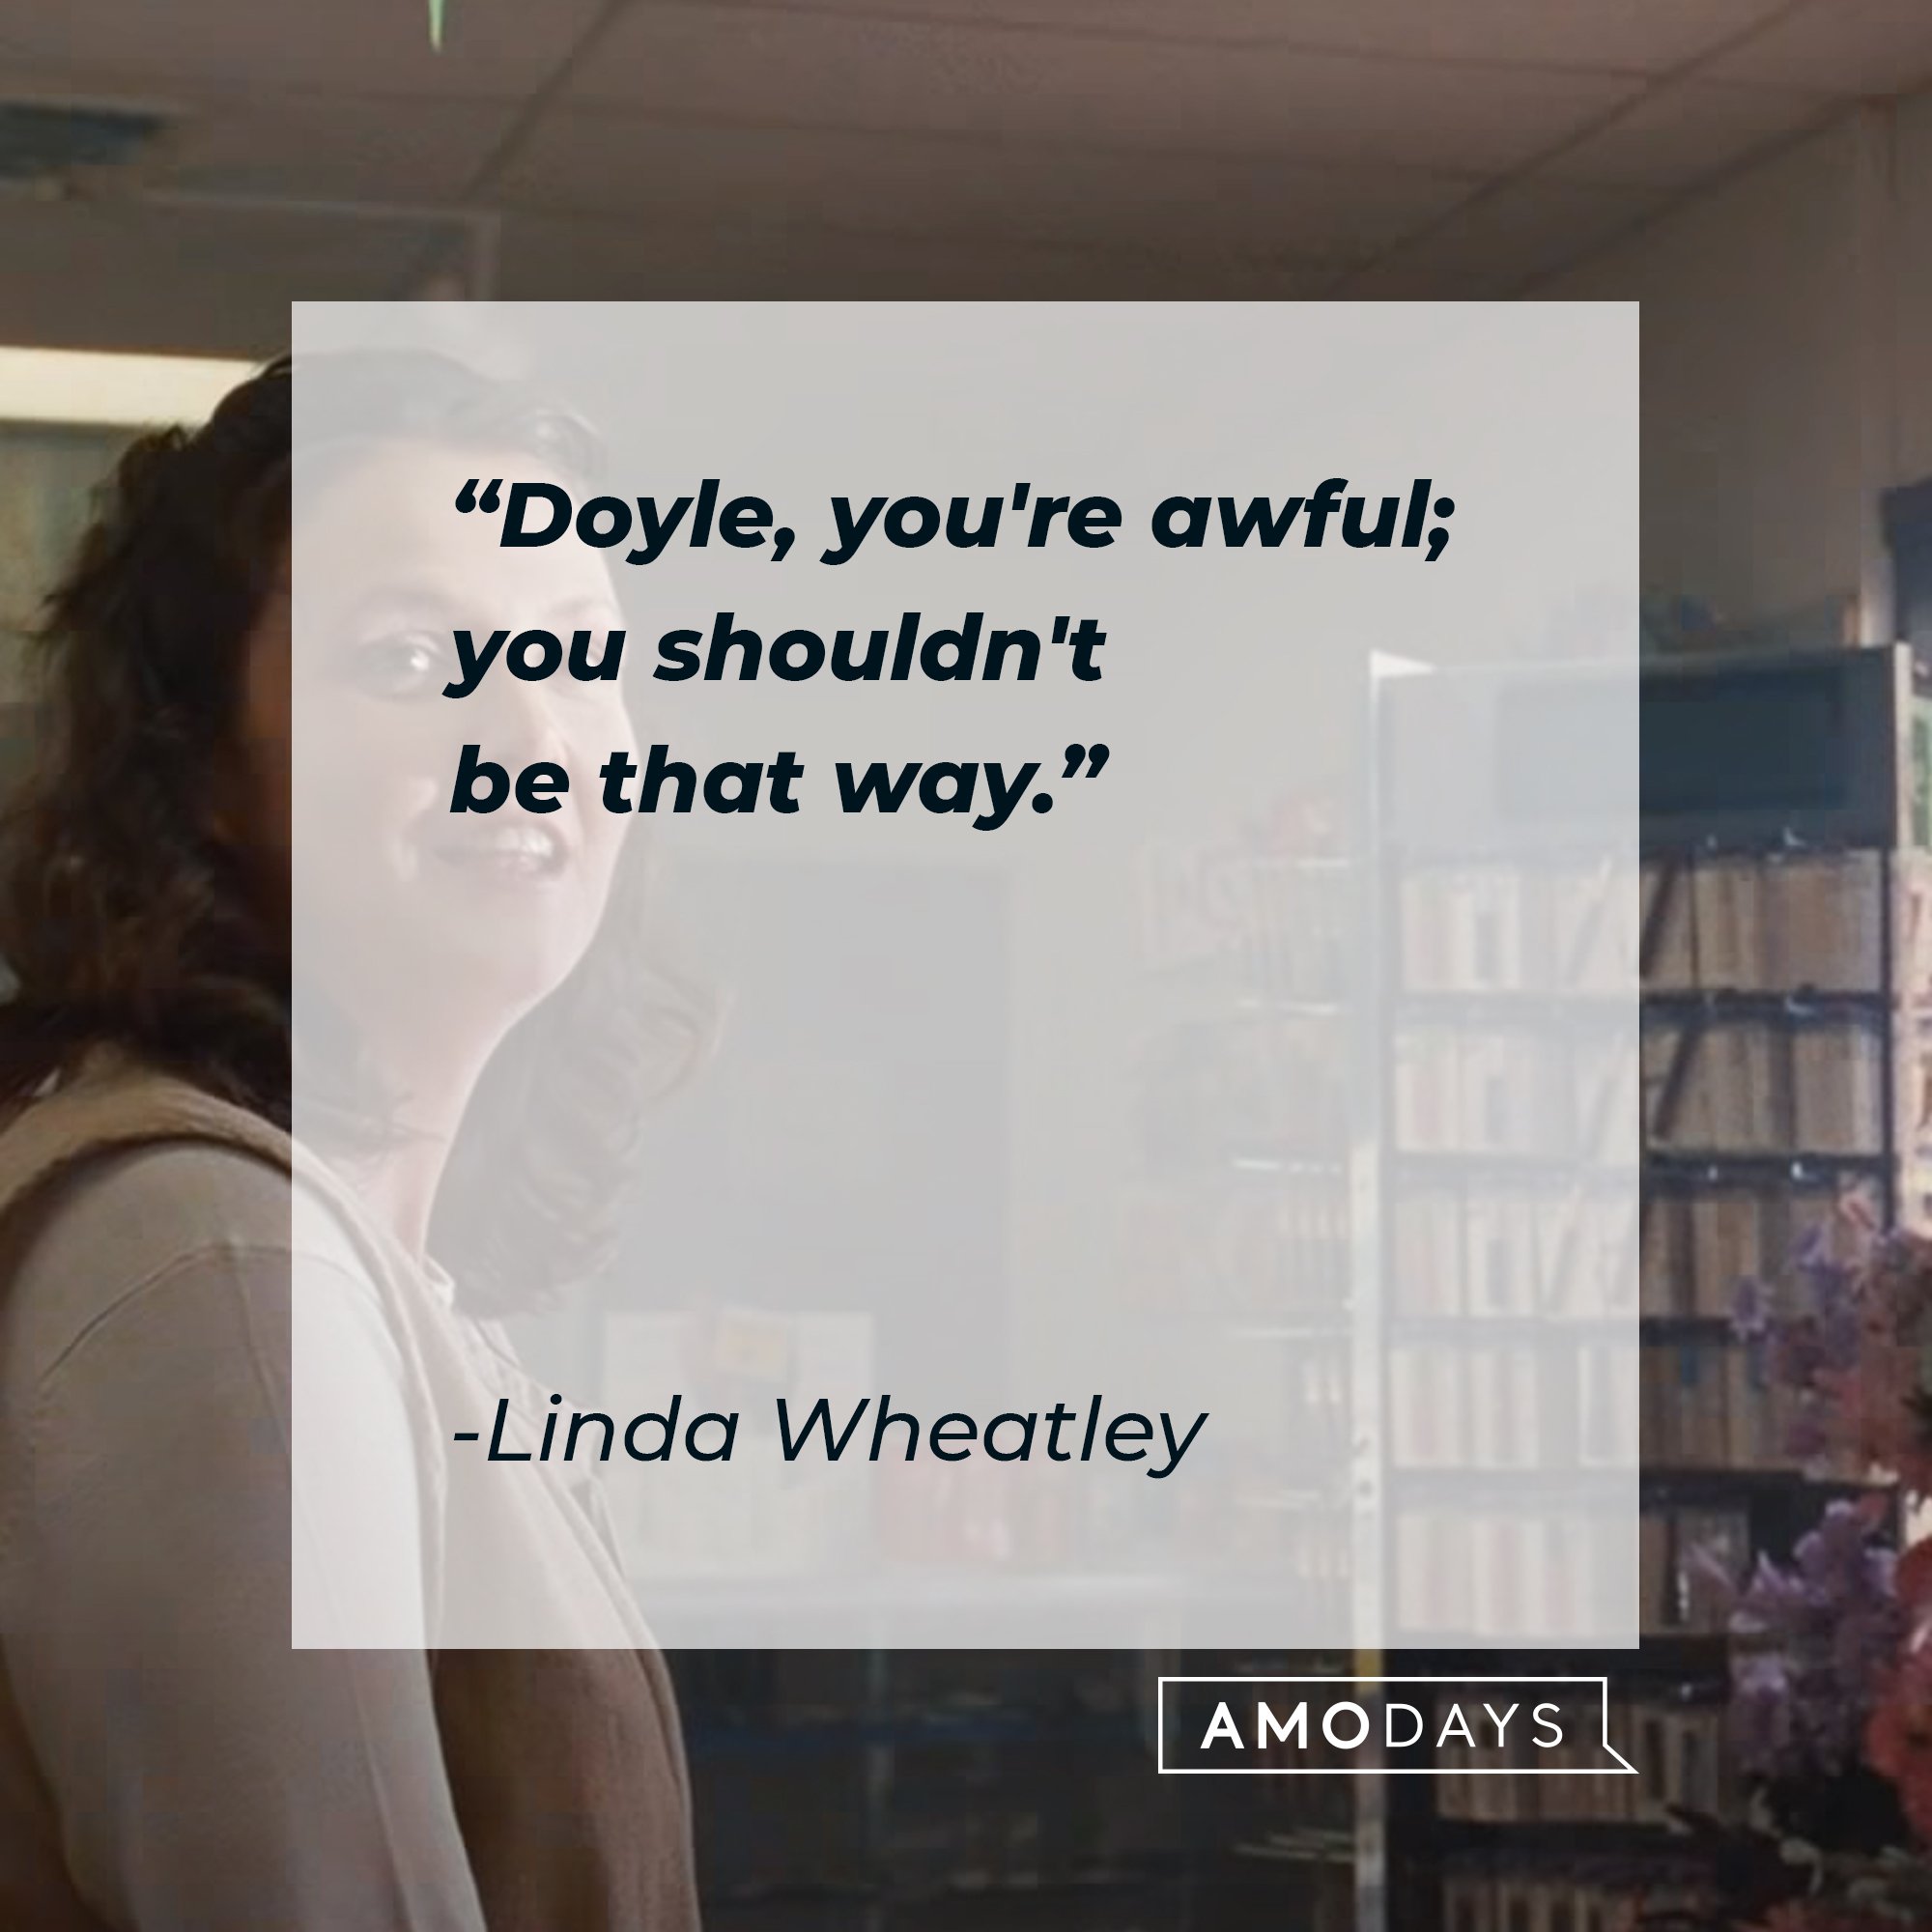 Linda Wheatley's quote: "Doyle, you're awful; you shouldn't be that way." | Image: AmoDays